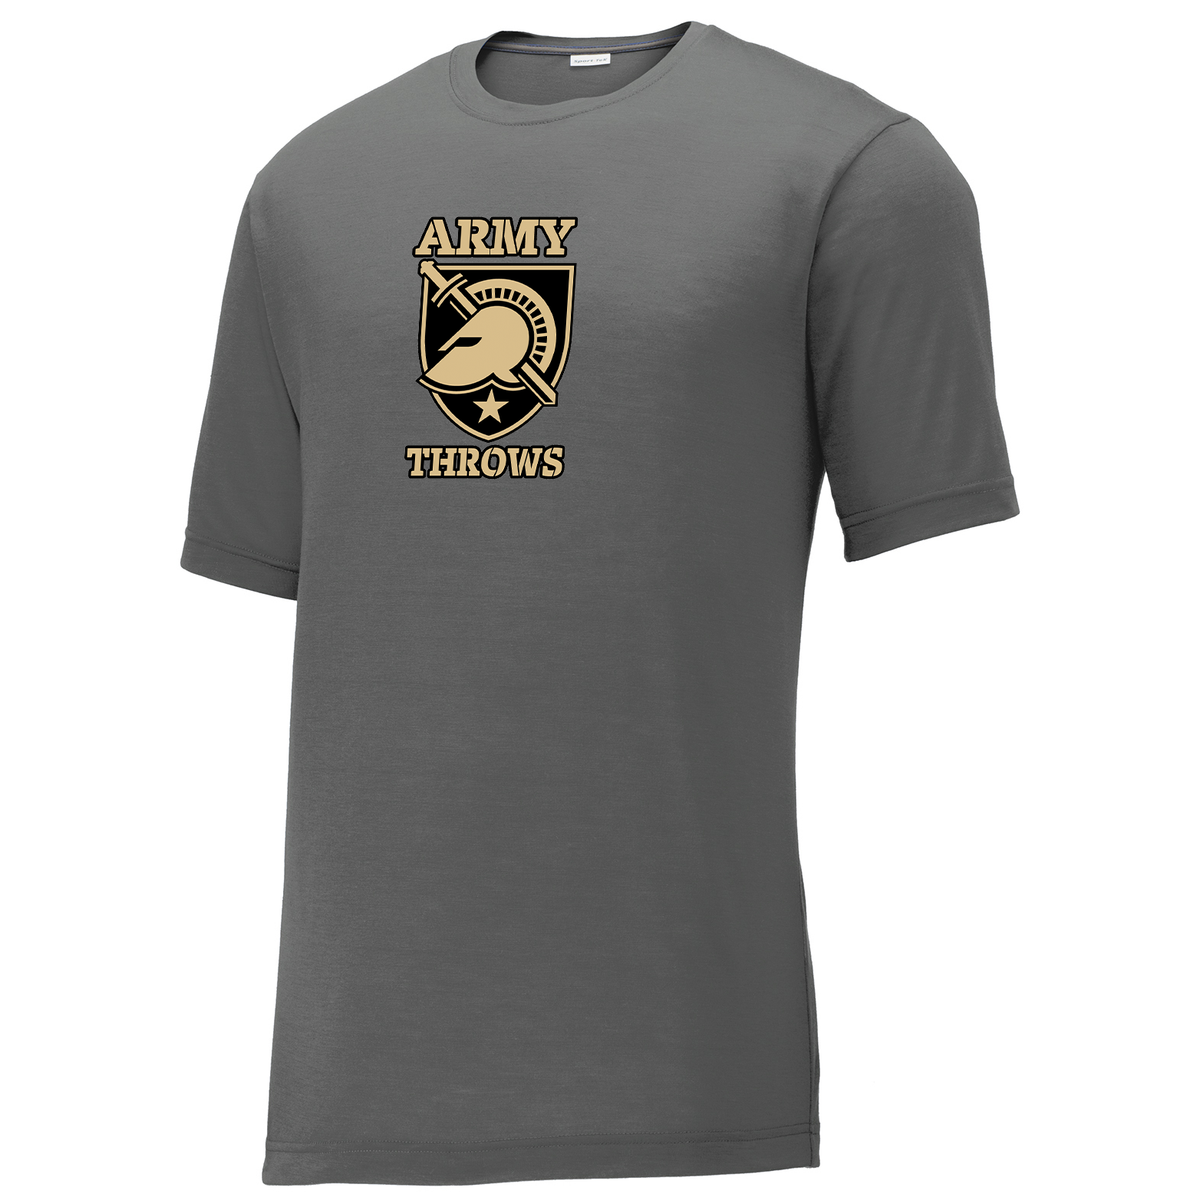 Army Throws CottonTouch Performance T-Shirt